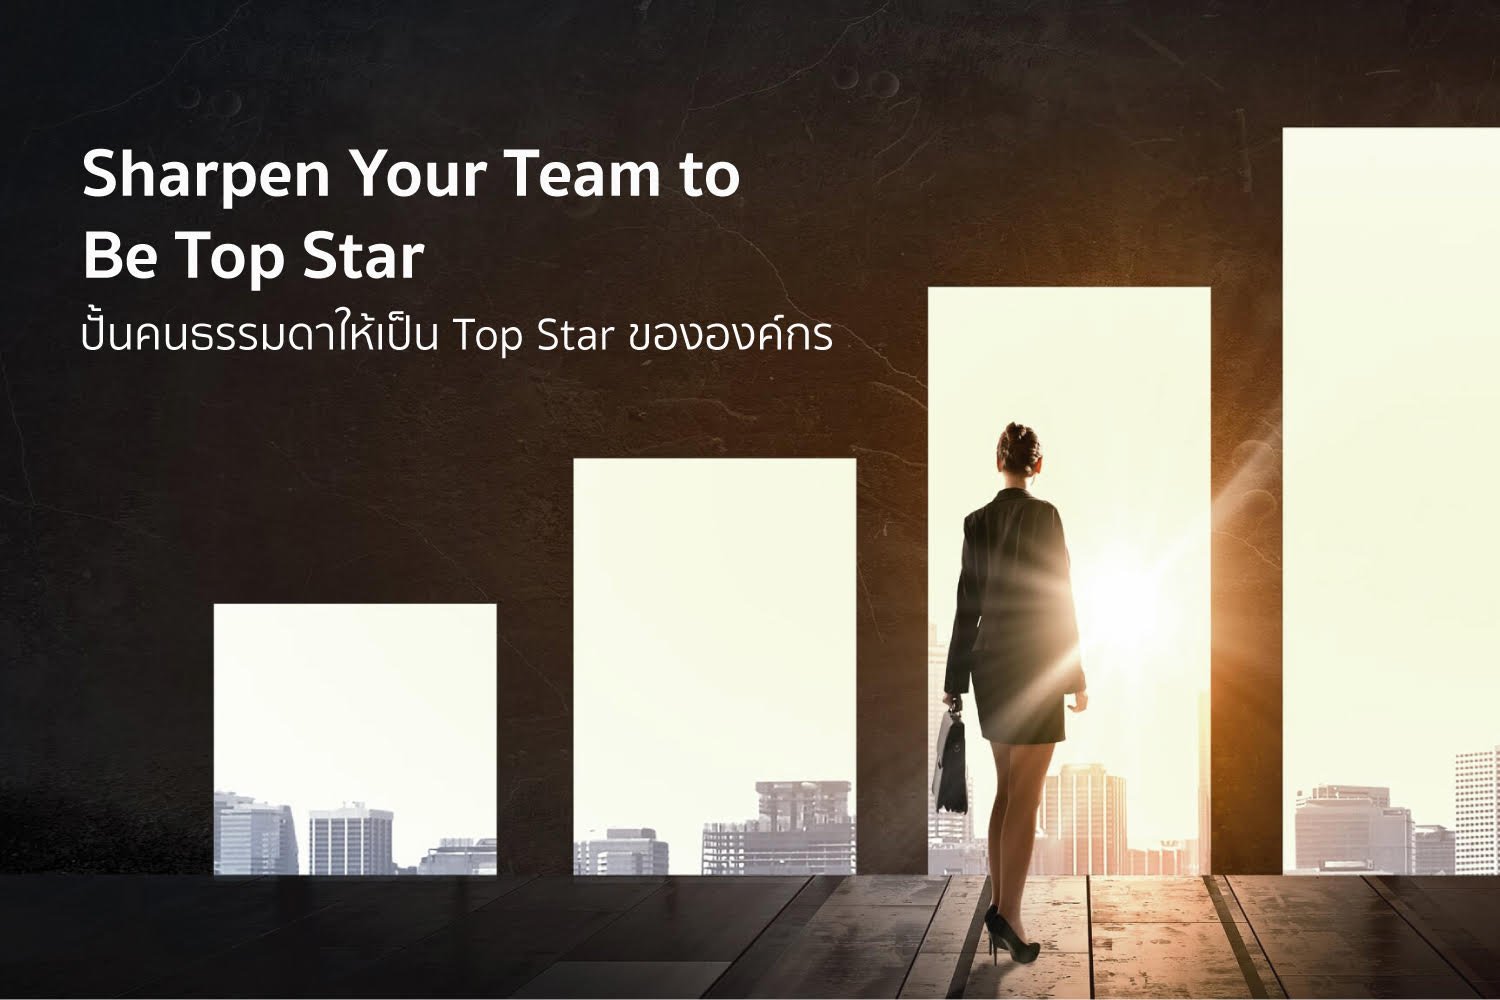 SHARPEN YOUR TEAM TO BE TOP STAR